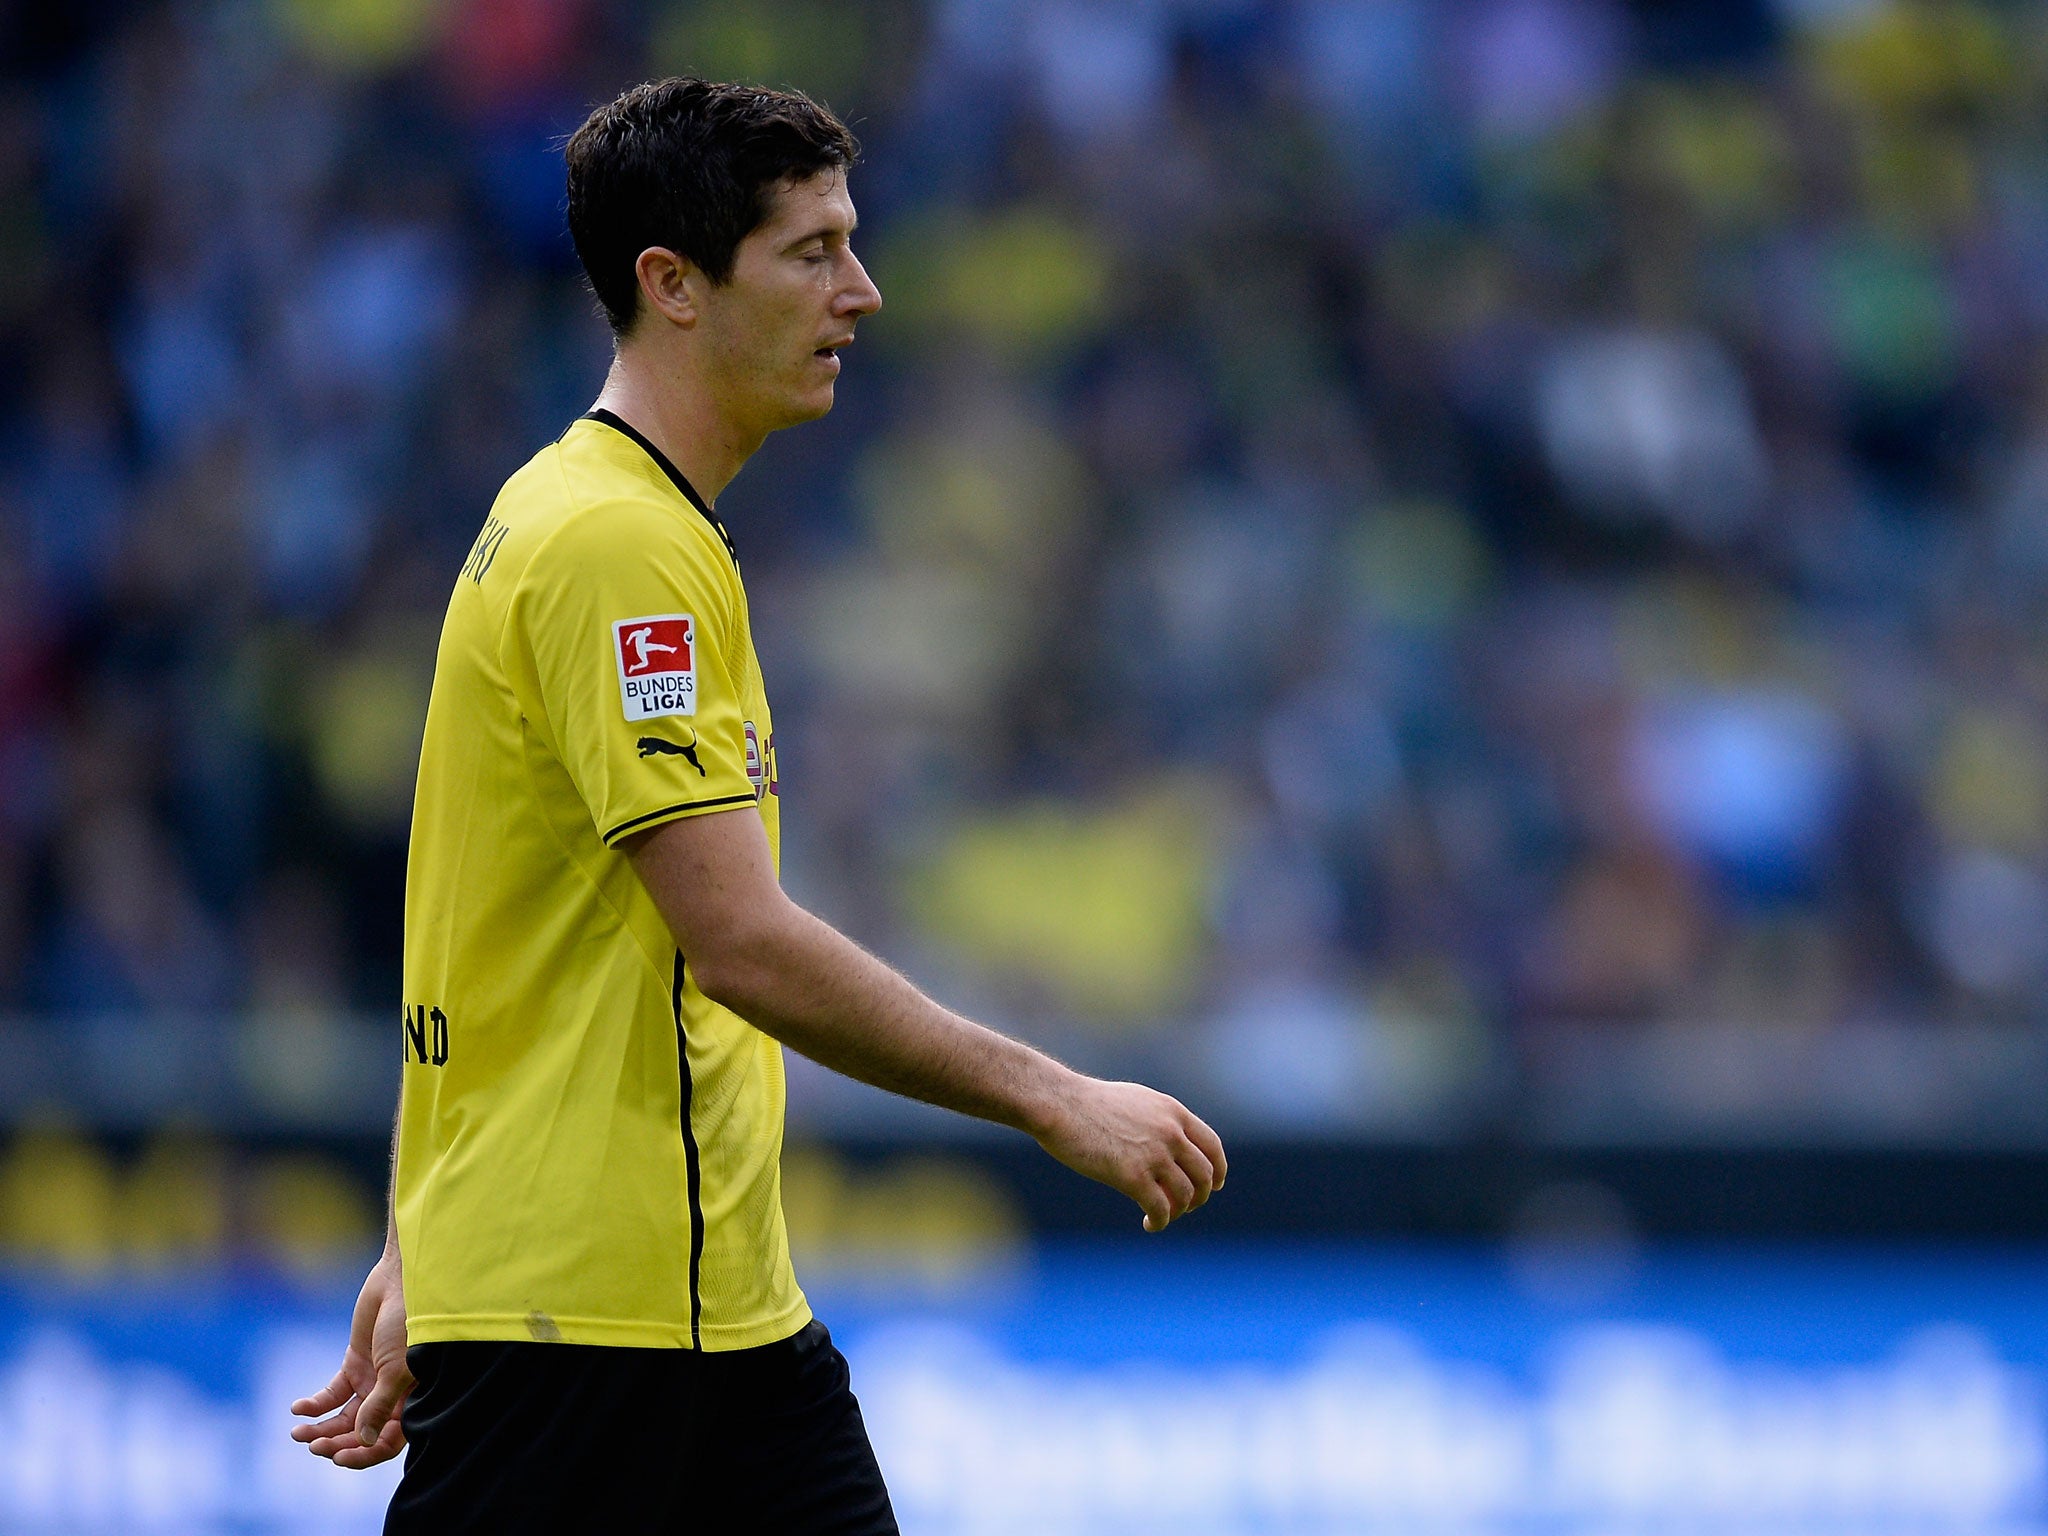 Robert Lewandowski has received a reported £3m pay rise for his final year at Borussia Dortmund